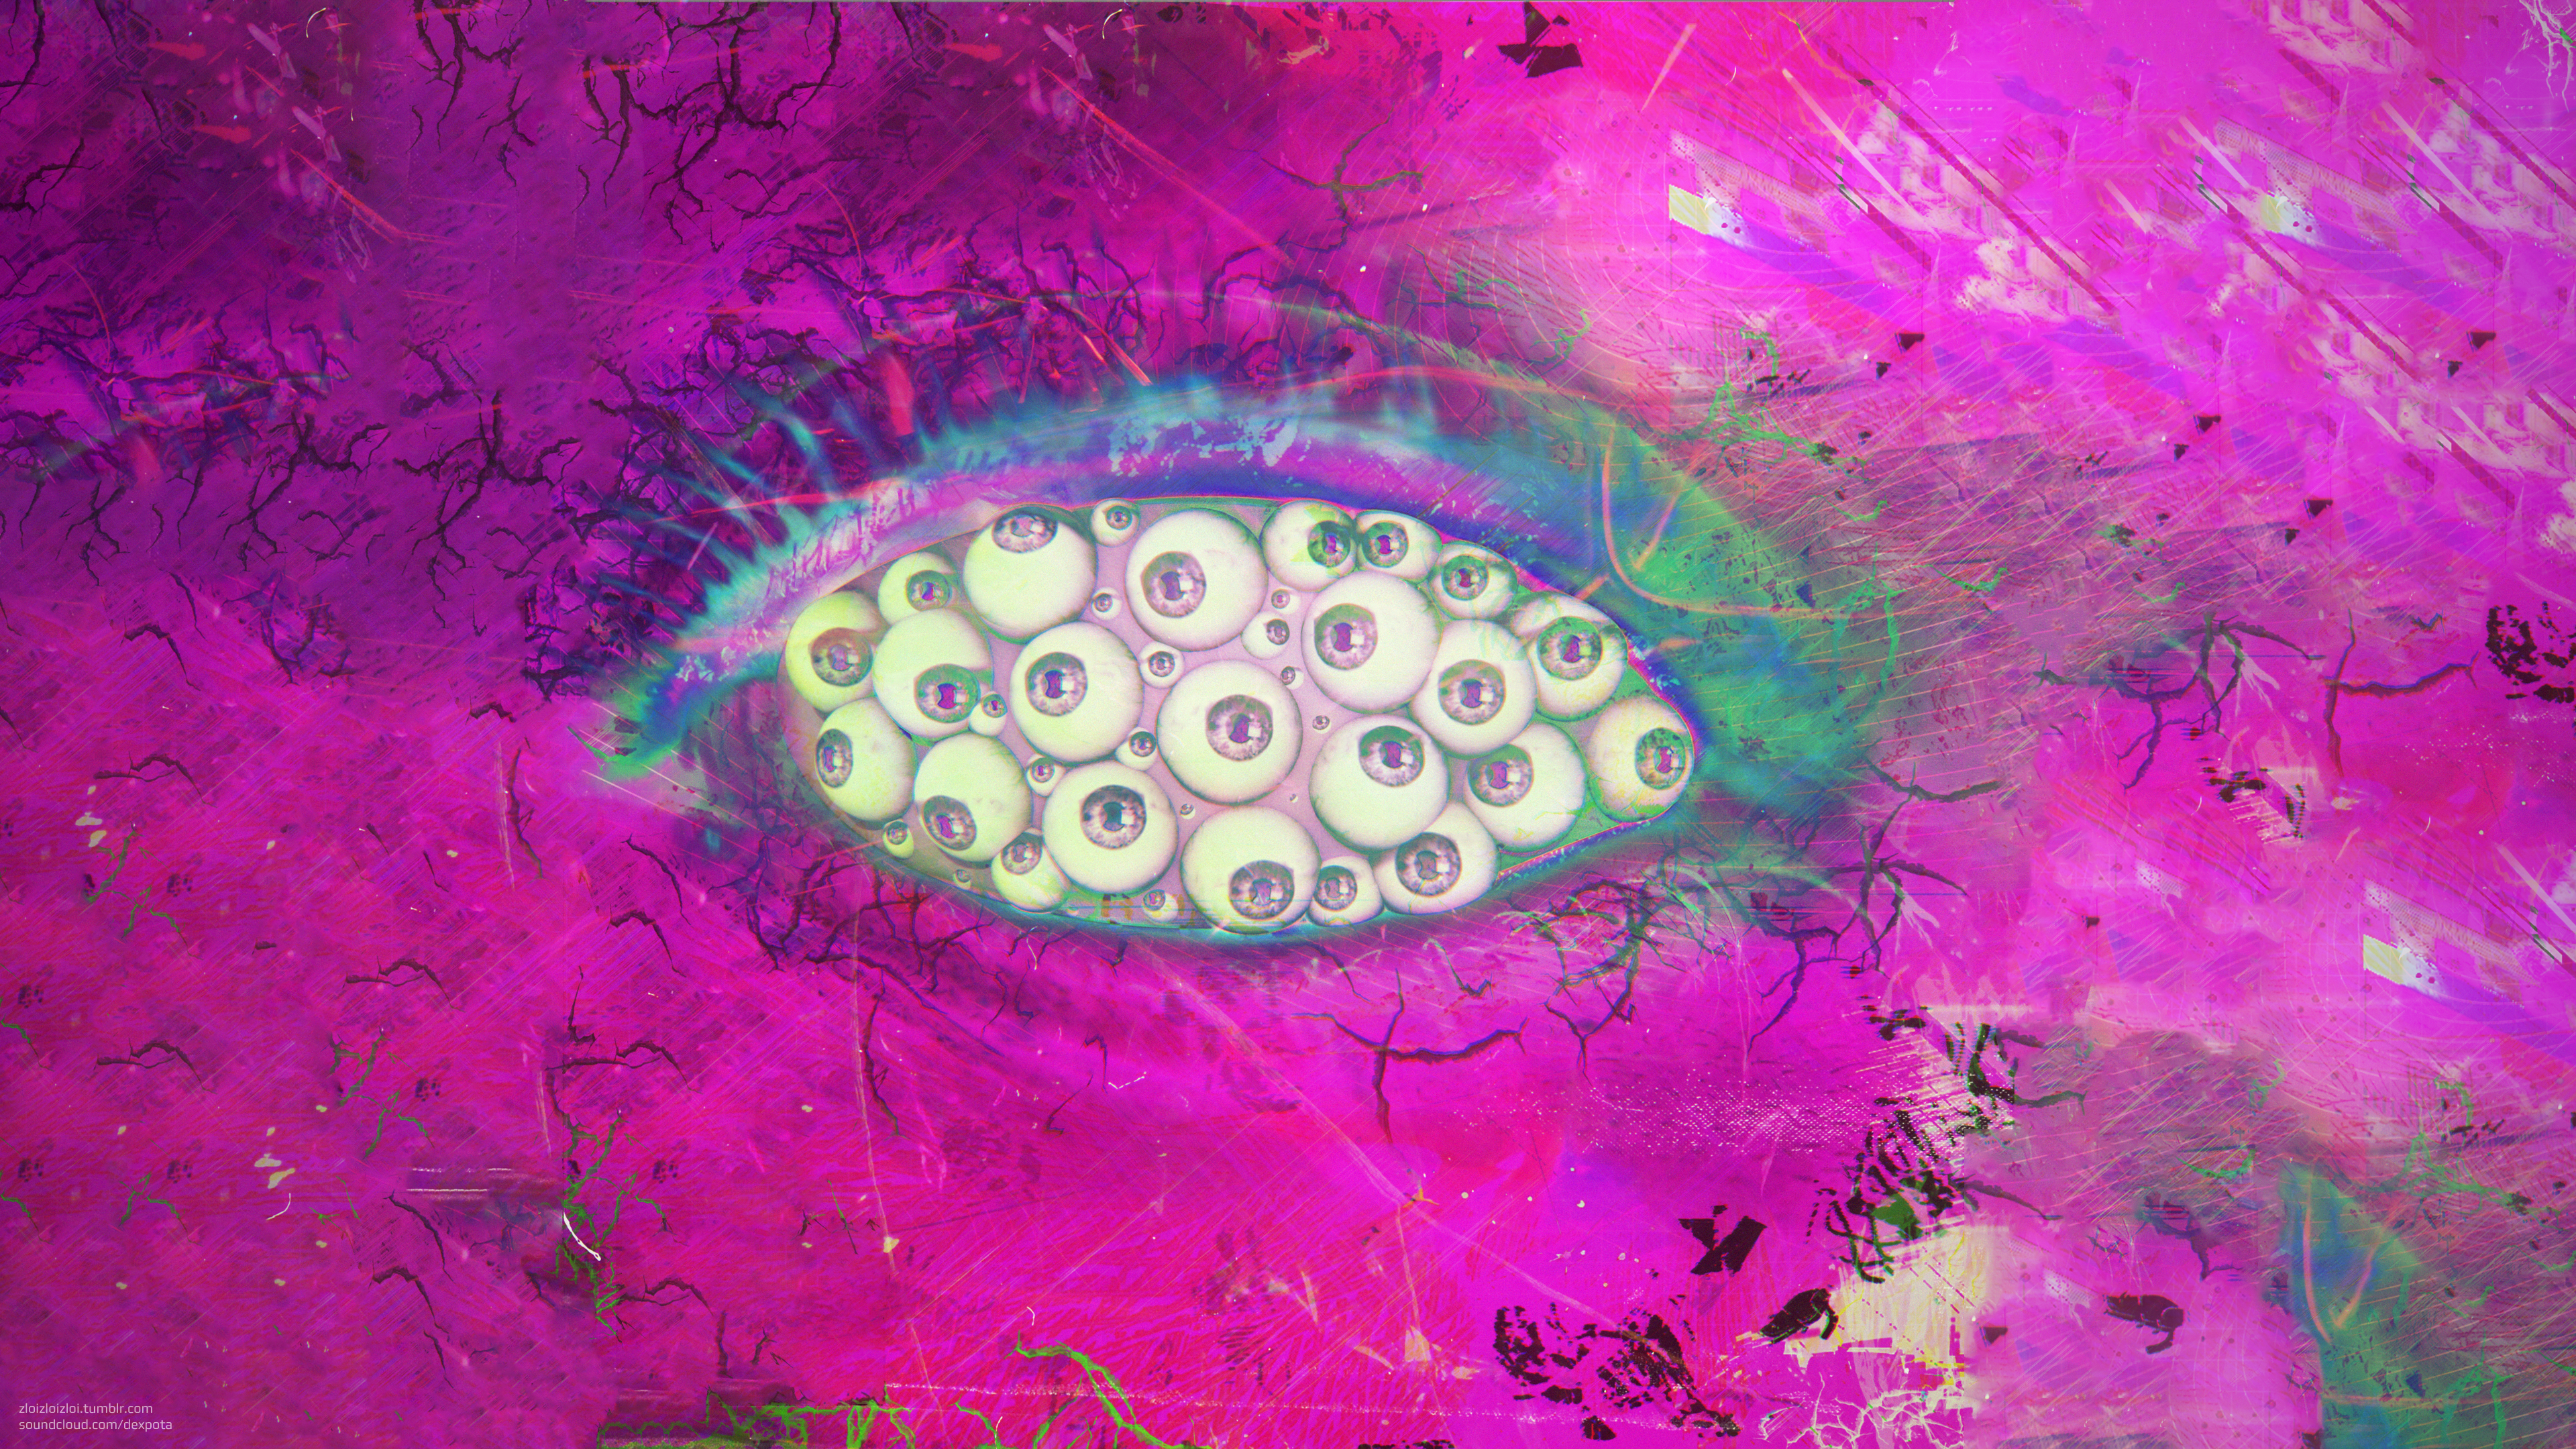 General 3840x2160 abstract LSD eyes purple background cover art album covers 3D Abstract dubstep trippy psychedelic purple